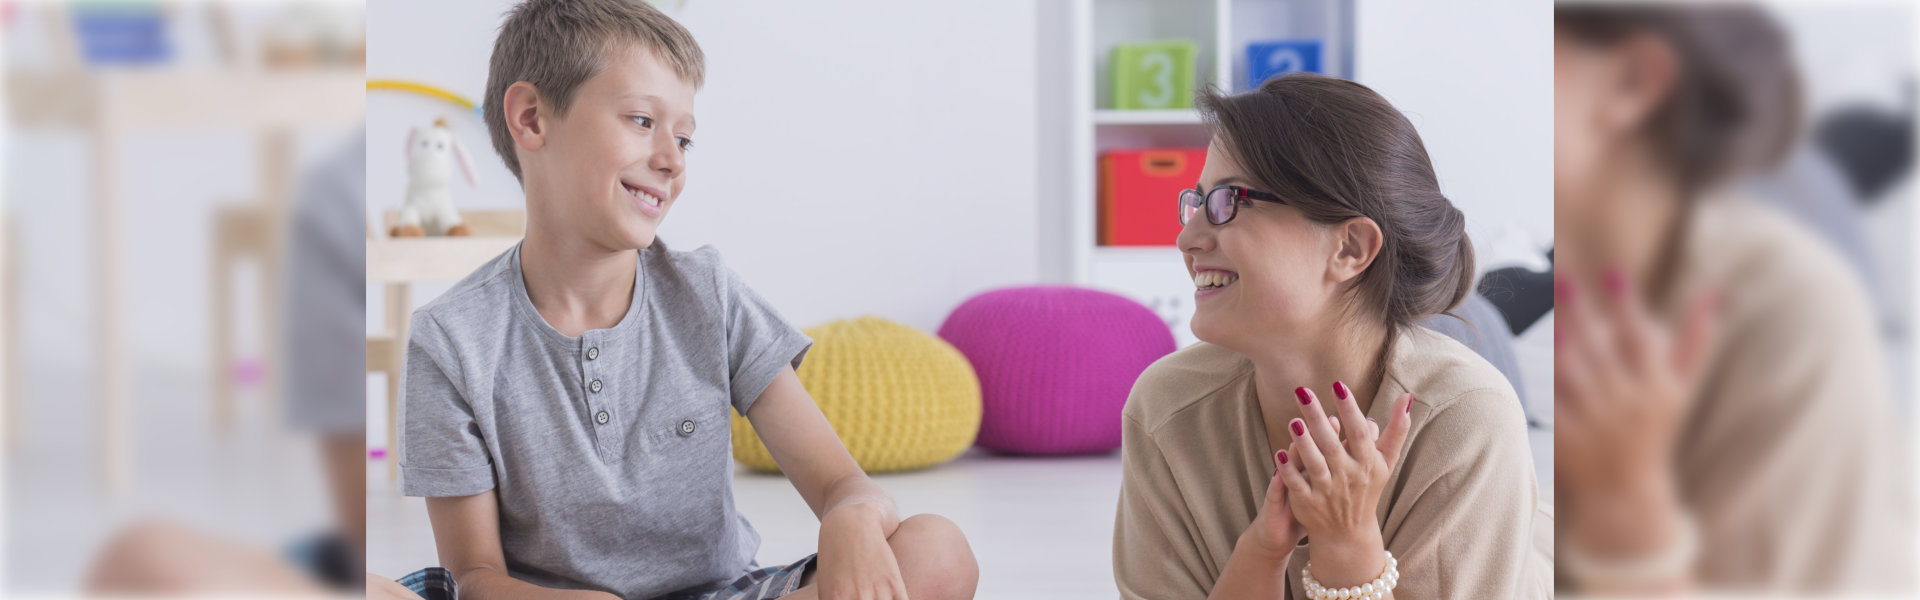 Happy little child during during therapy with school counselor